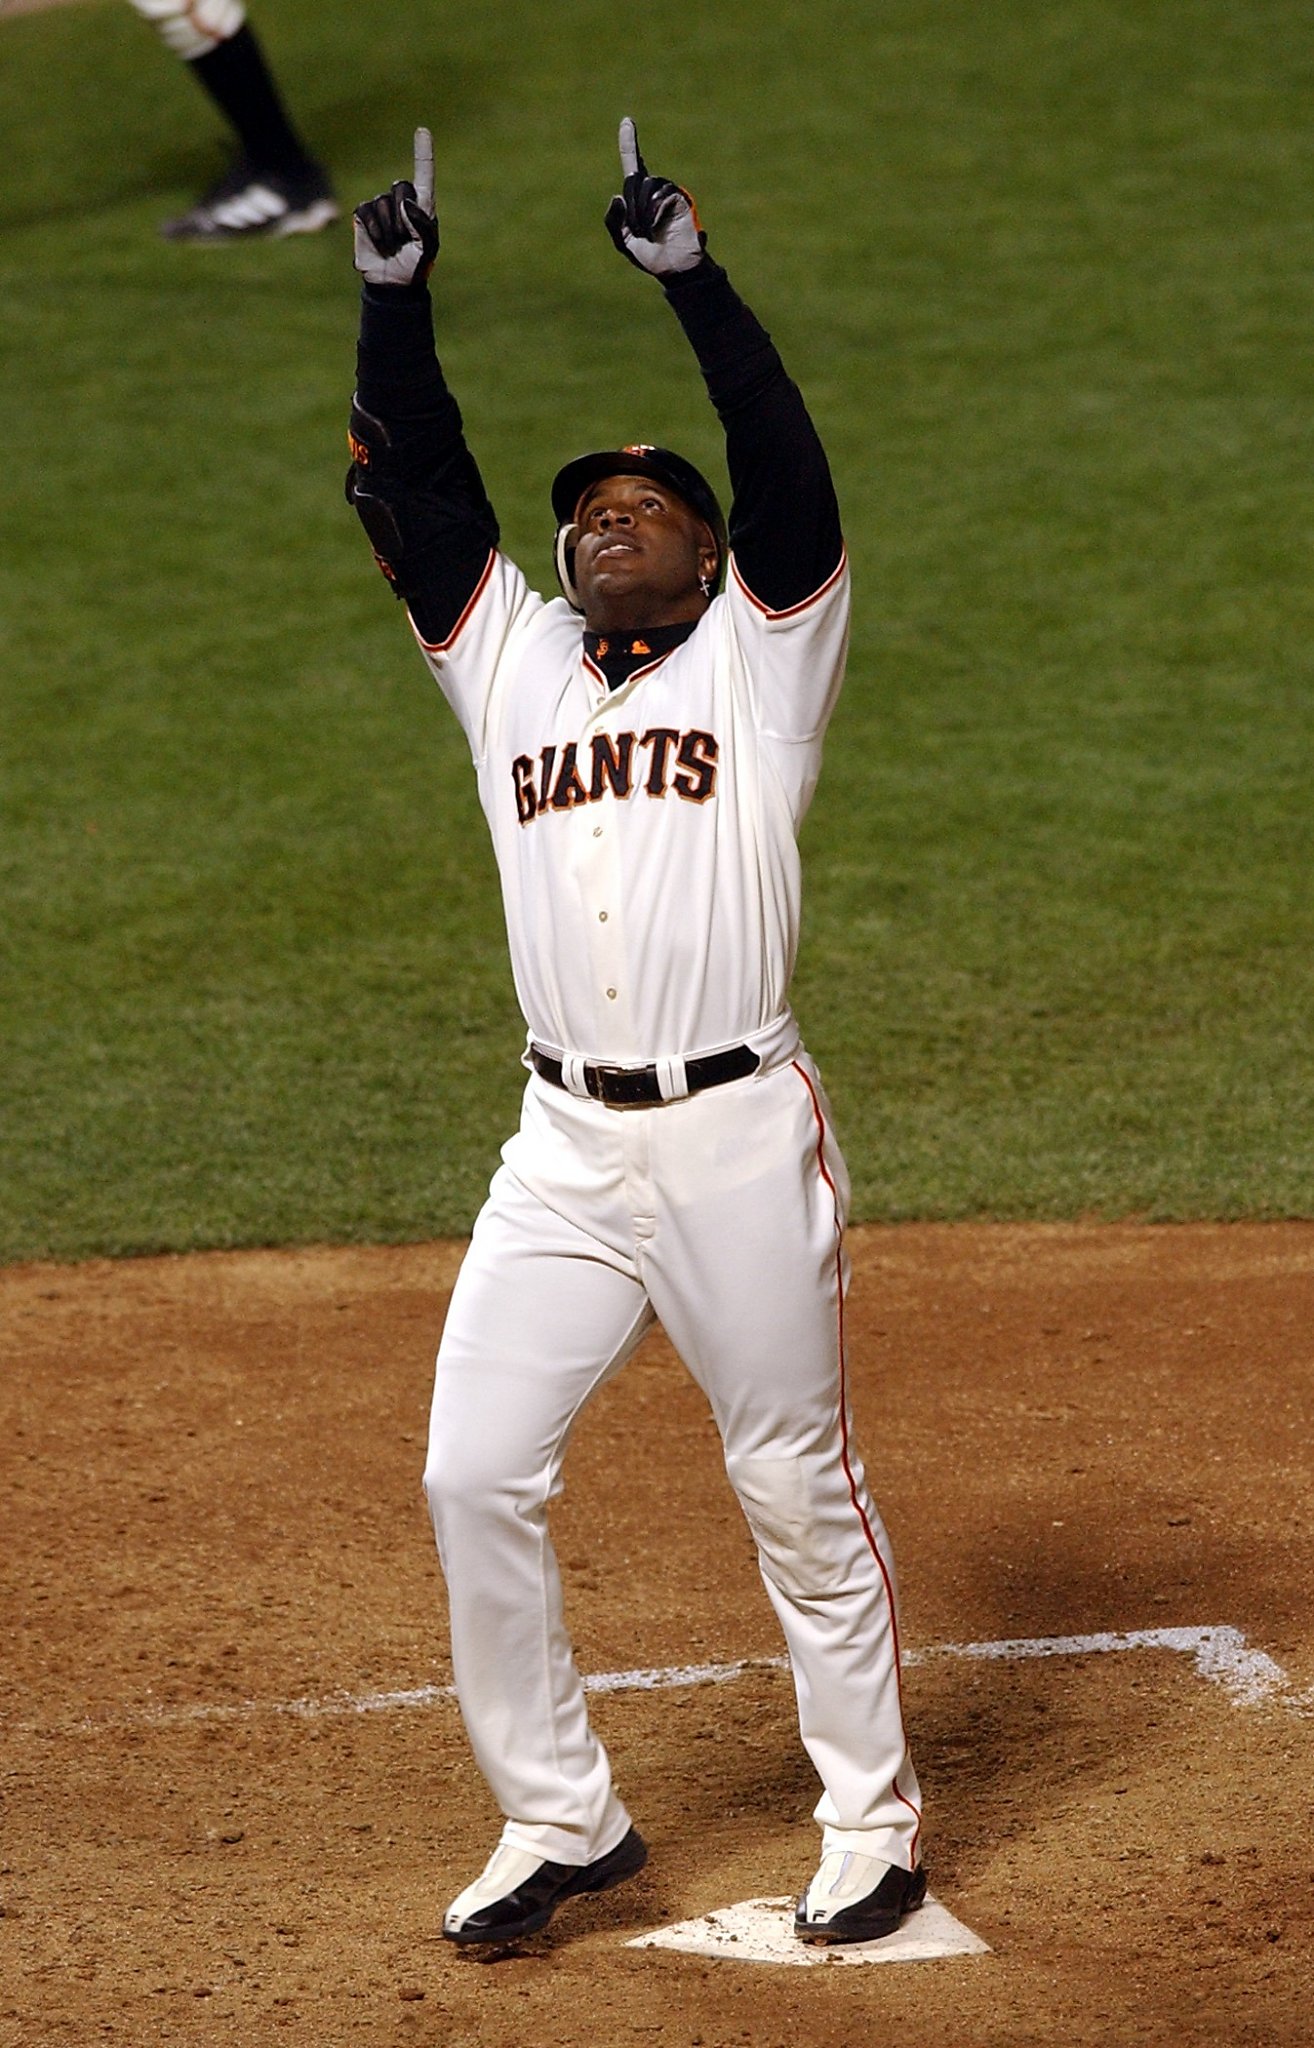 Barry Bonds and the Hall of Fame: It's destiny